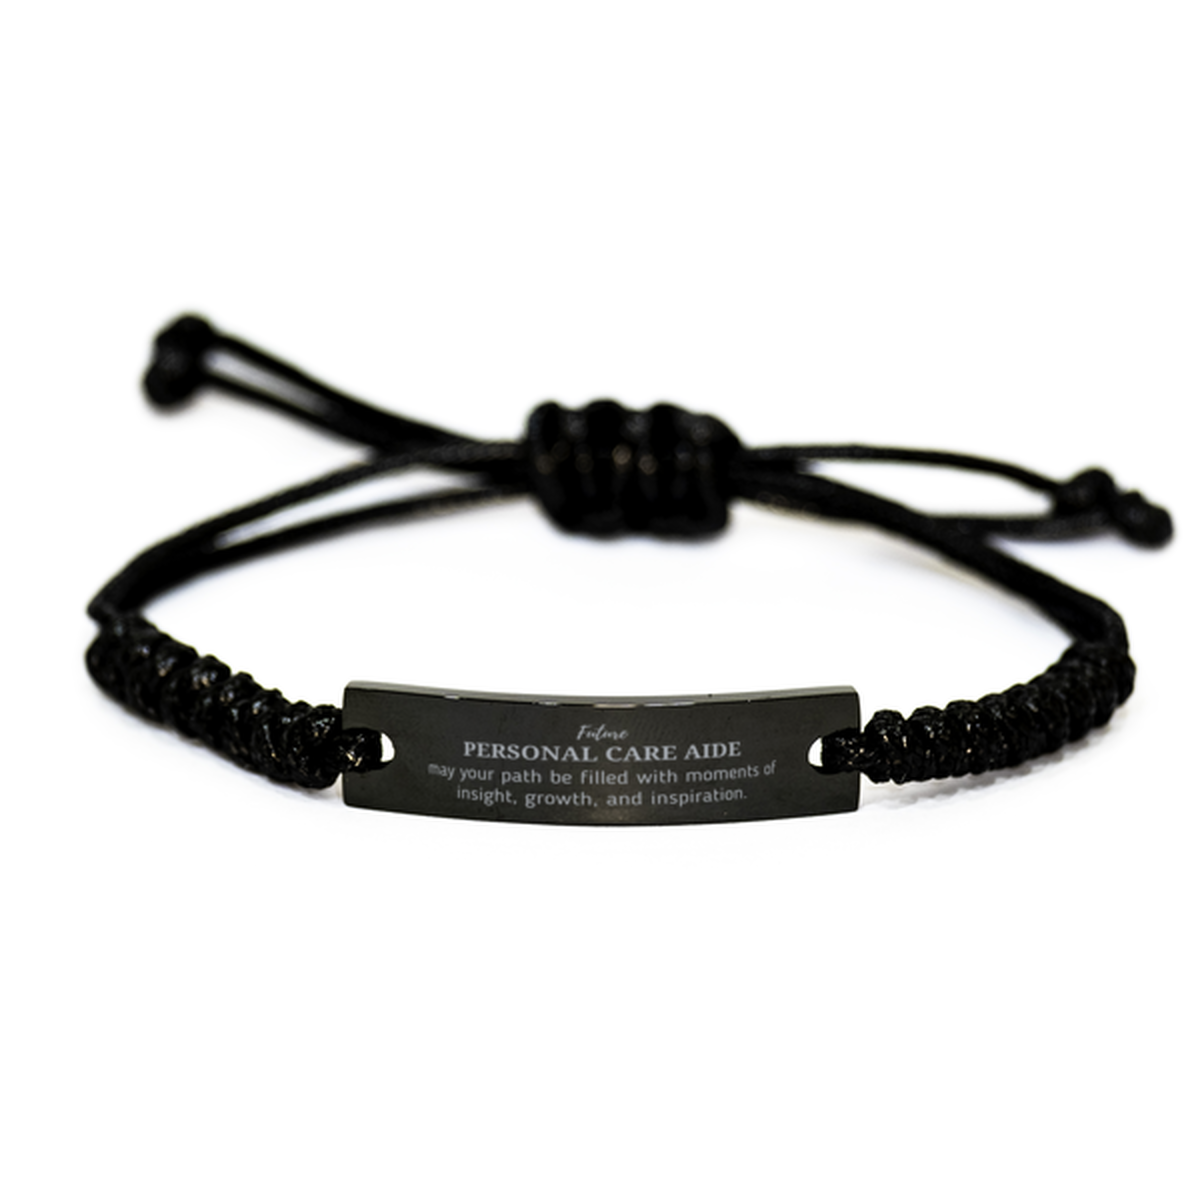 Future Personal Care Aide Gifts, May your path be filled with moments of insight, Graduation Gifts for New Personal Care Aide, Christmas Unique Black Rope Bracelet For Men, Women, Friends